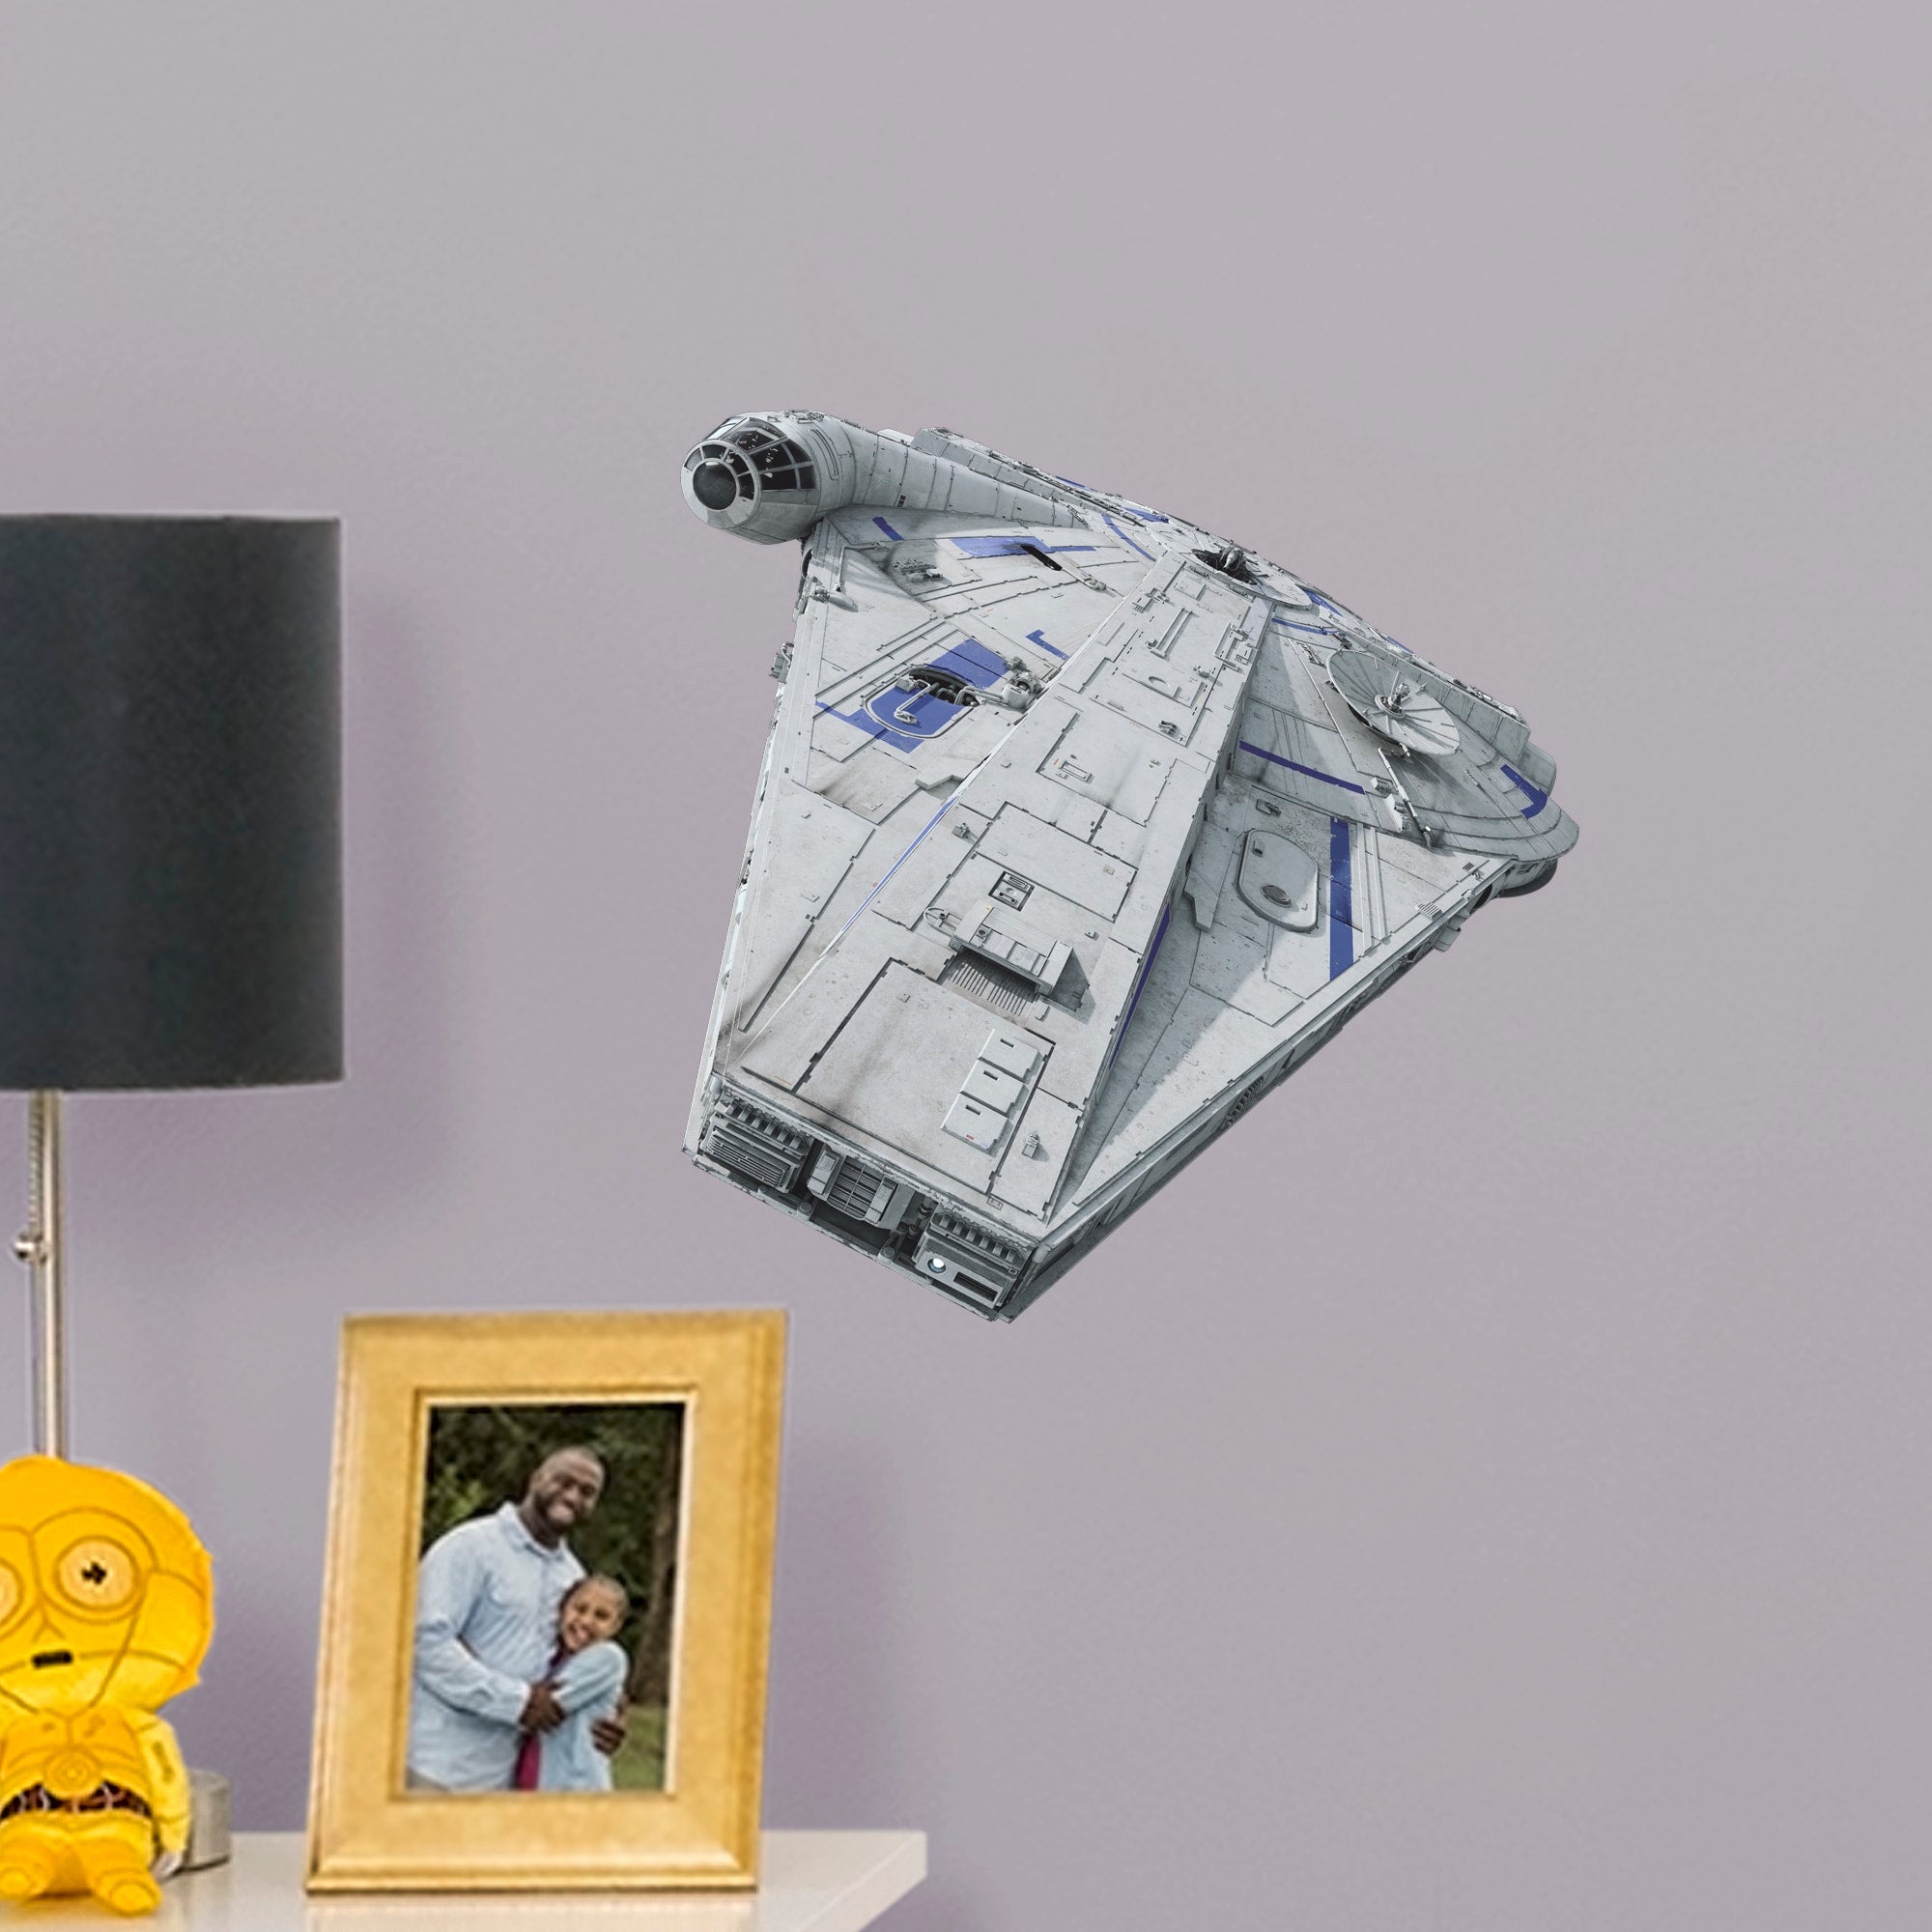 Millennium Falcon - Solo: A Star Wars Story - Officially Licensed Removable Wall Decal Large by Fathead | Vinyl